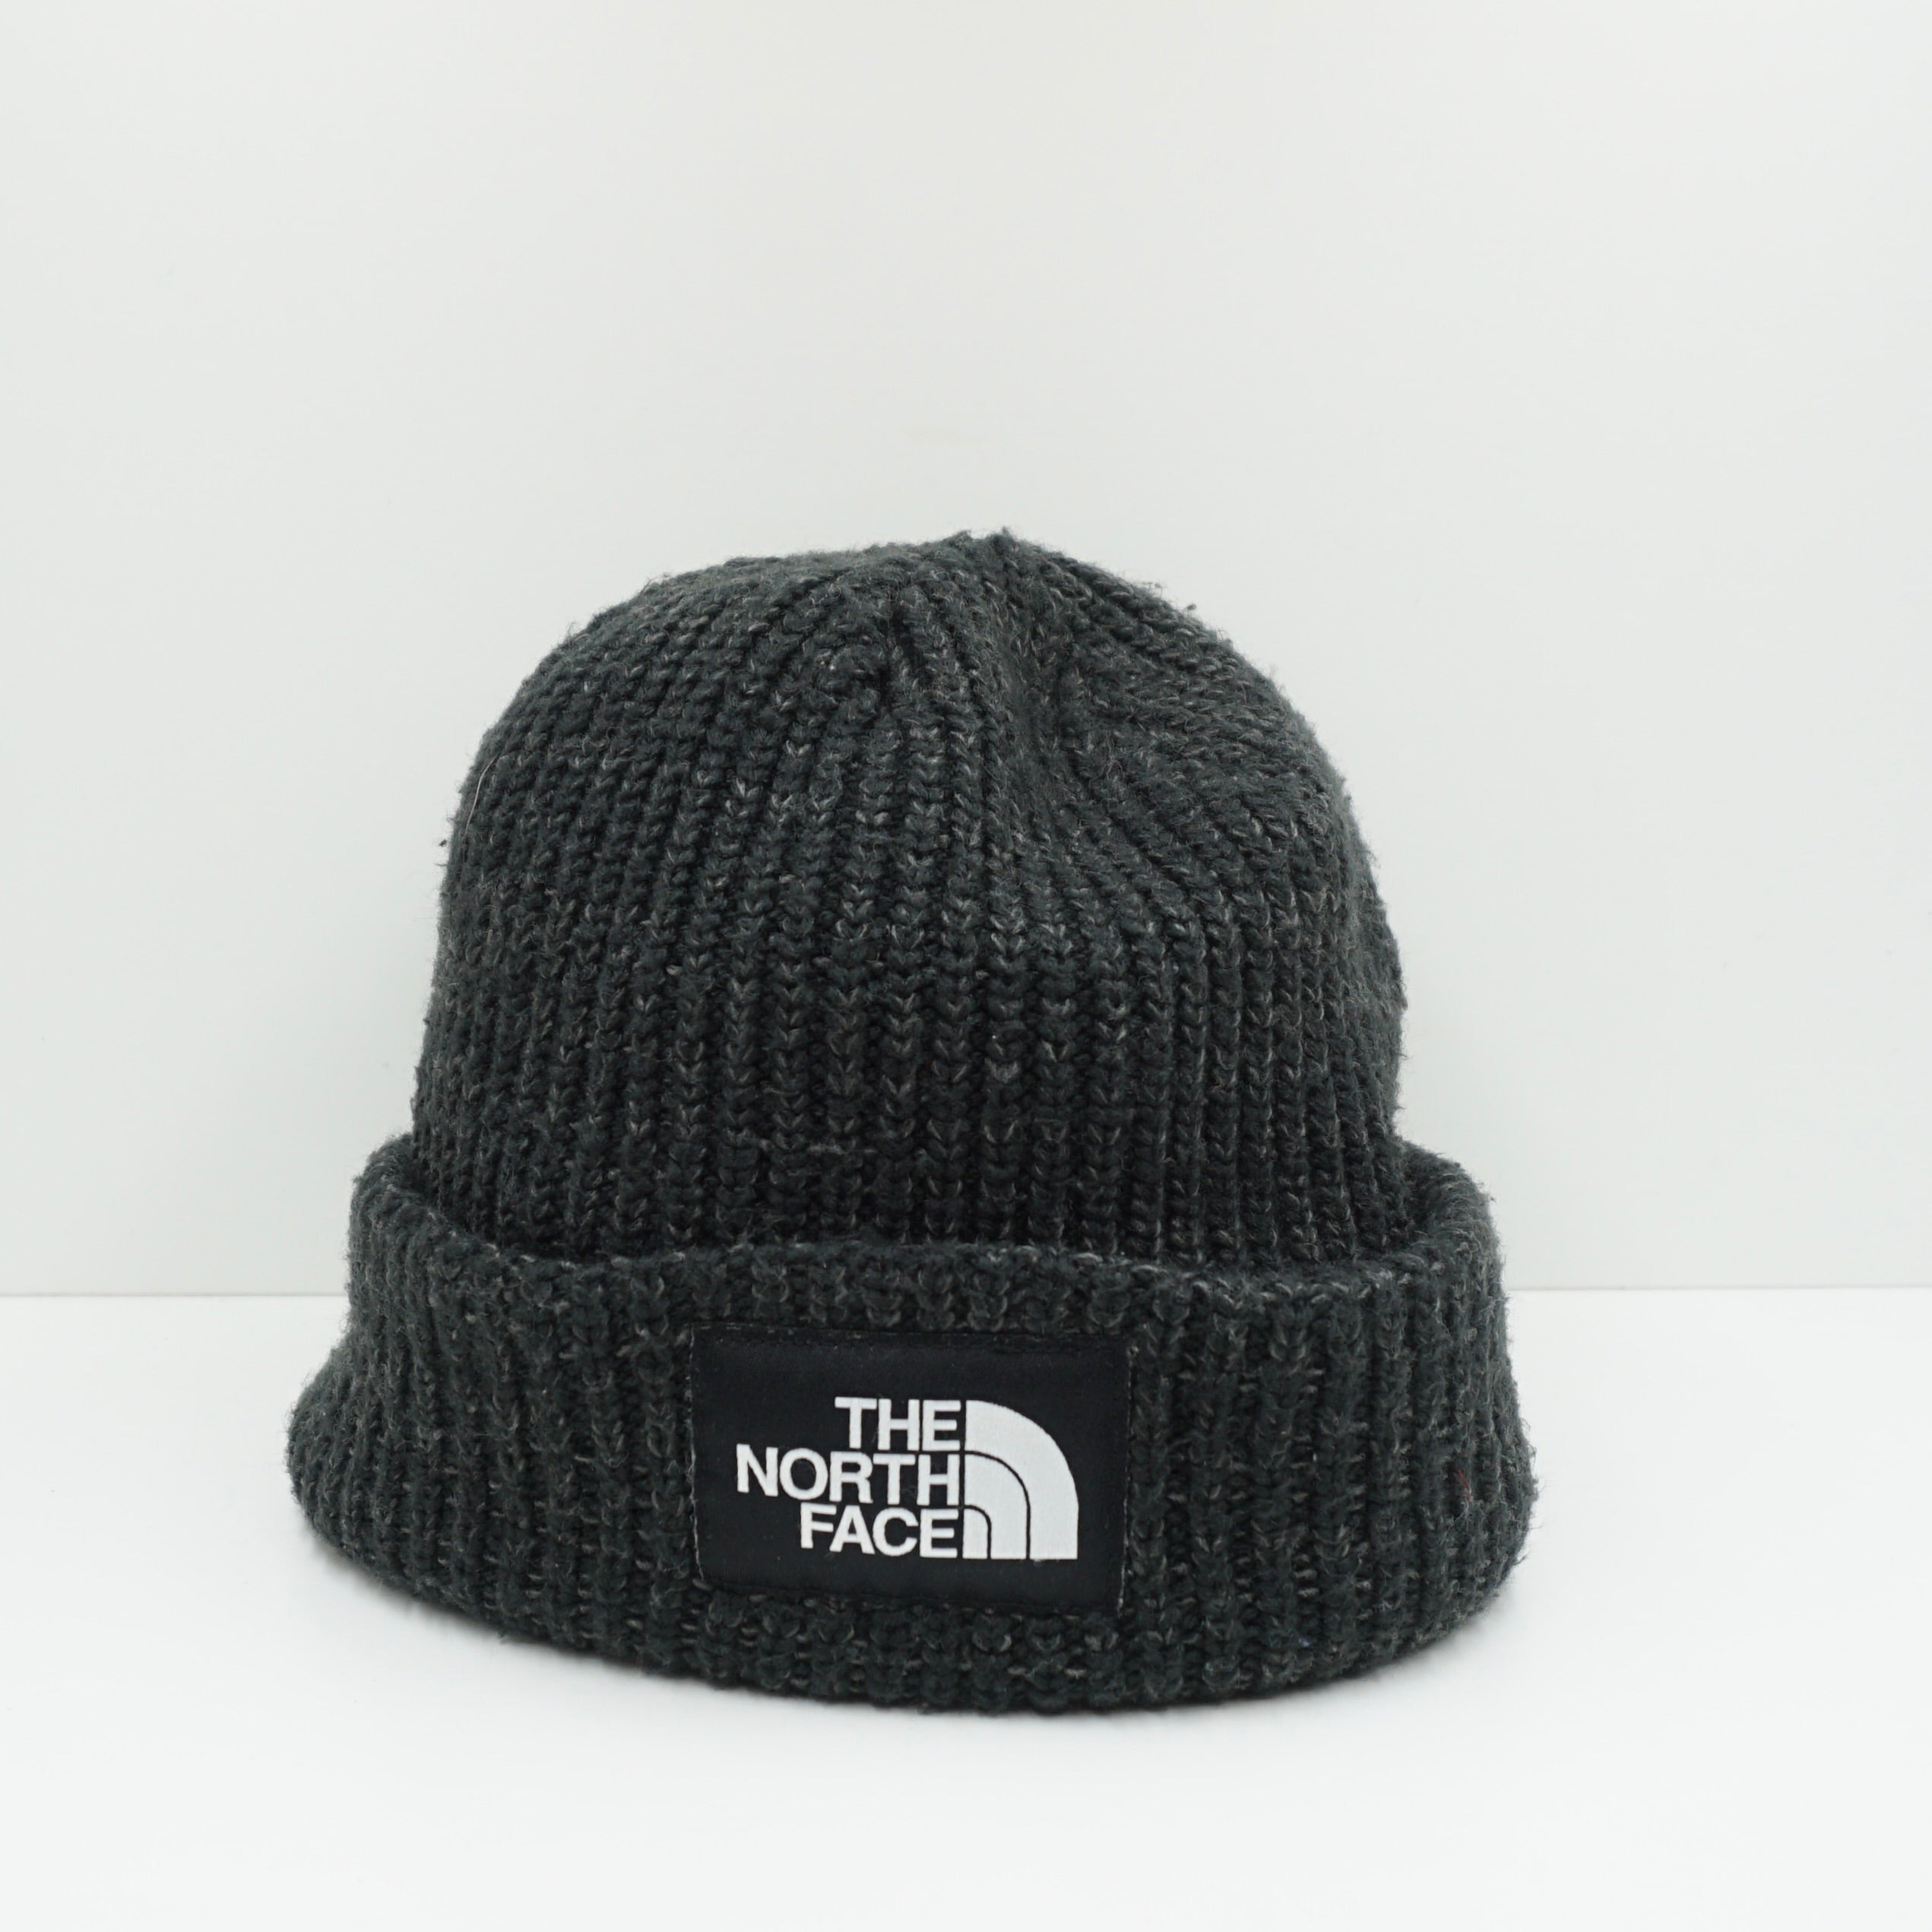 The North Face Grey/Black Beanie